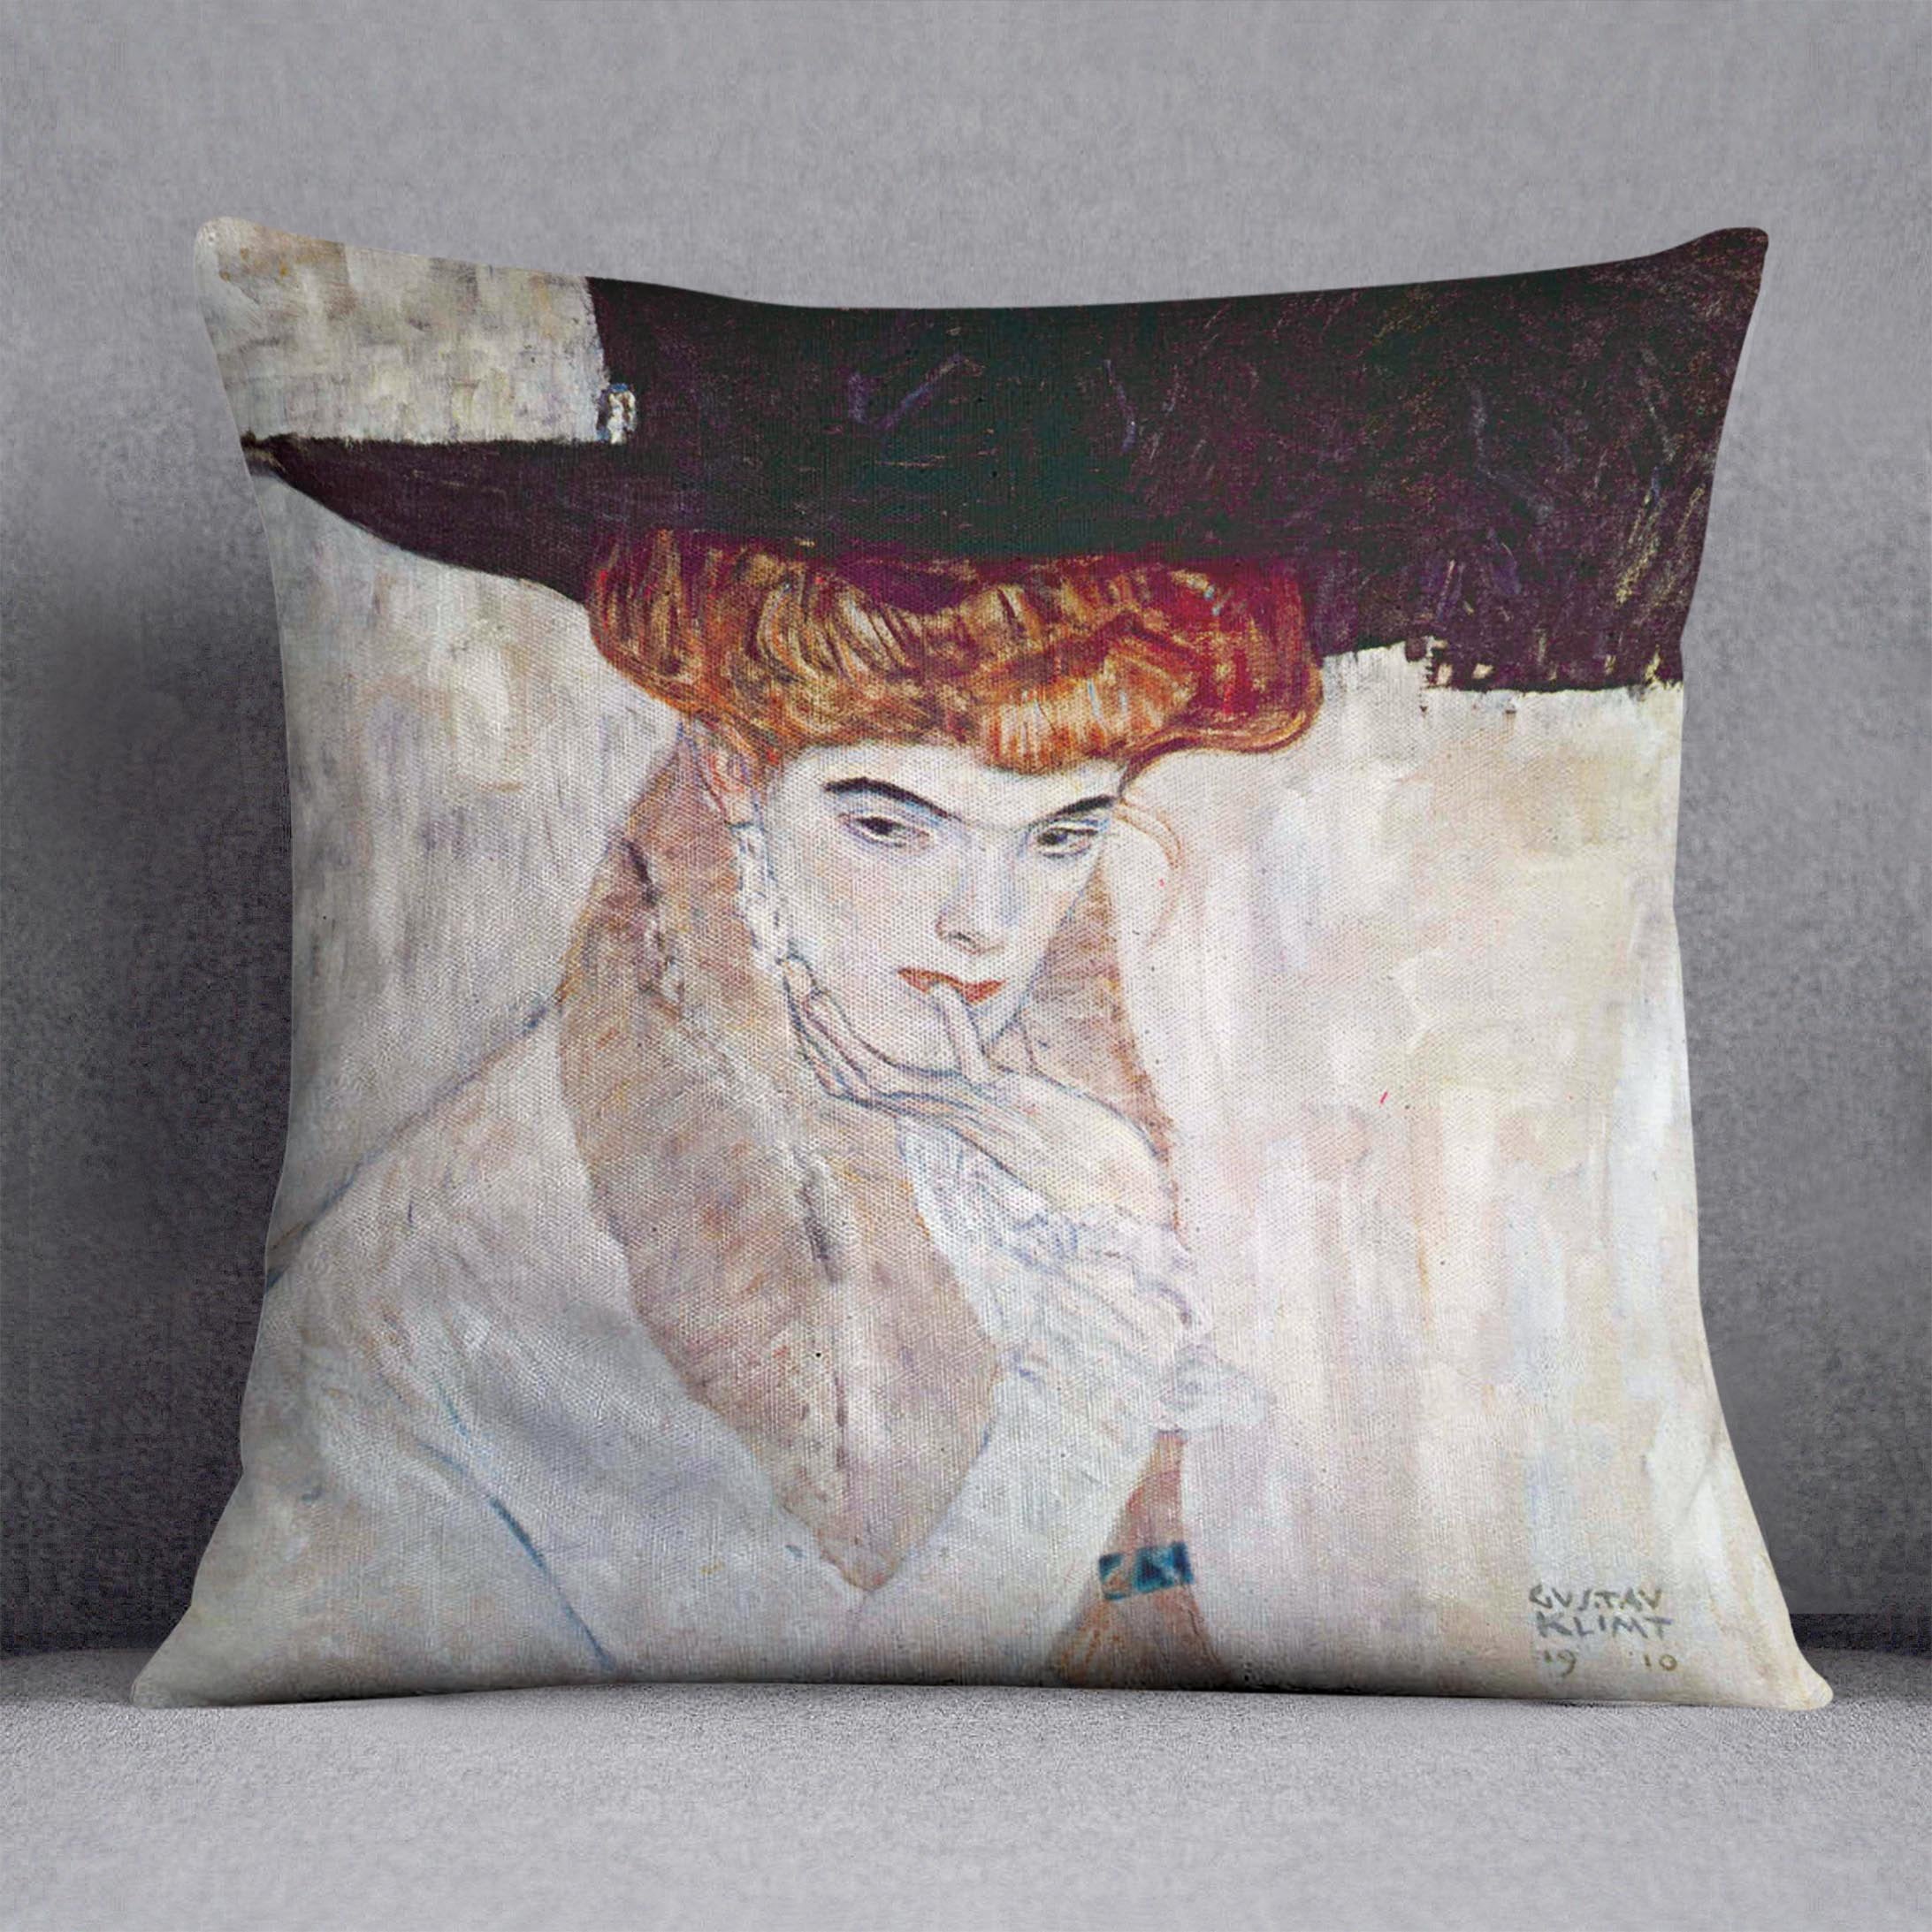 The Black Hat by Klimt Throw Pillow